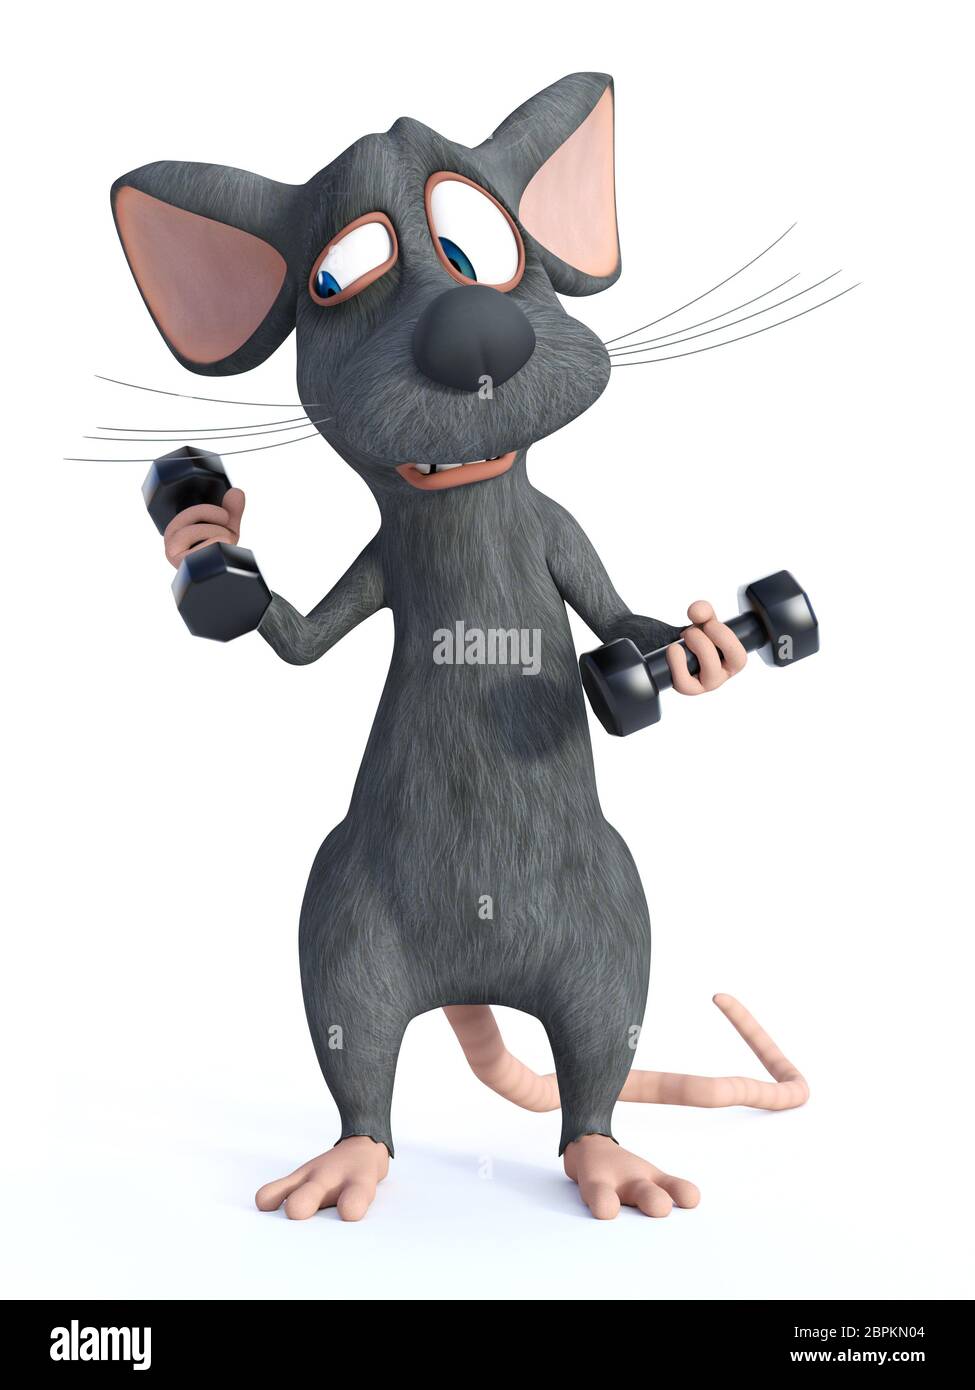 https://c8.alamy.com/comp/2BPKN04/3d-rendering-of-a-cute-cartoon-mouse-exercising-with-dumbbells-he-looks-a-bit-strained-white-background-2BPKN04.jpg